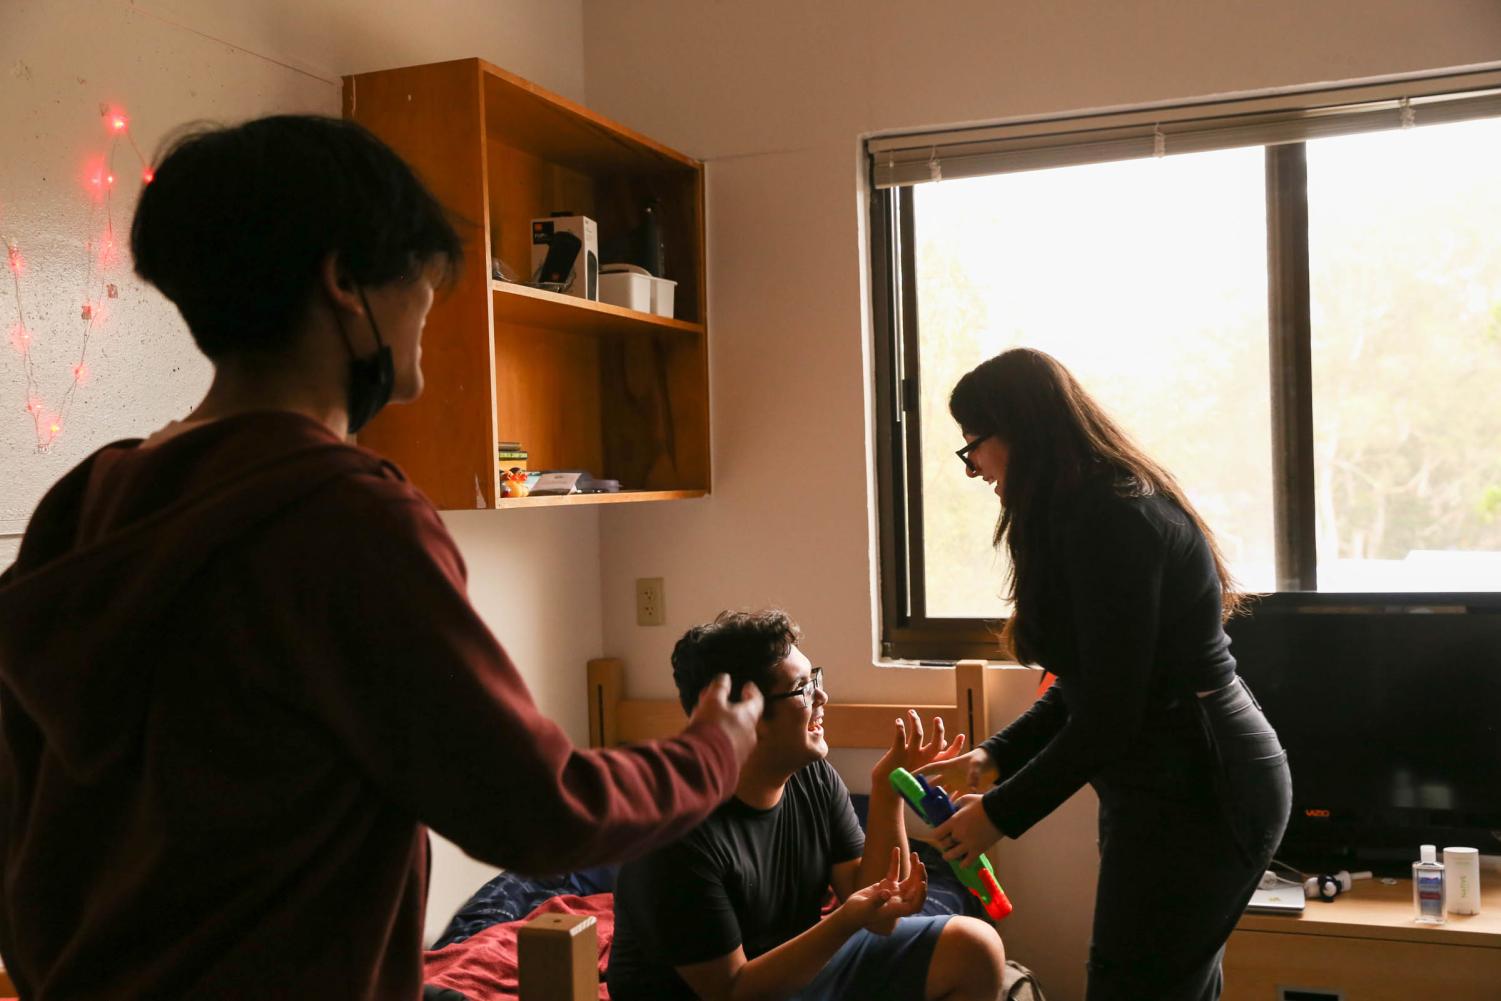 First-year student Christian Aransazo (left), Oscar Duran (center) and Elisa Hanhan (right) hang out in Duran’s dorm in Mary Park Hall at SF State on Monday, Sept. 12, 2022. Aransazo and Hanhan both commute, so Duran’s dorm is a place to hang out on campus. (Juliana Yamada/Xpress Magazine)